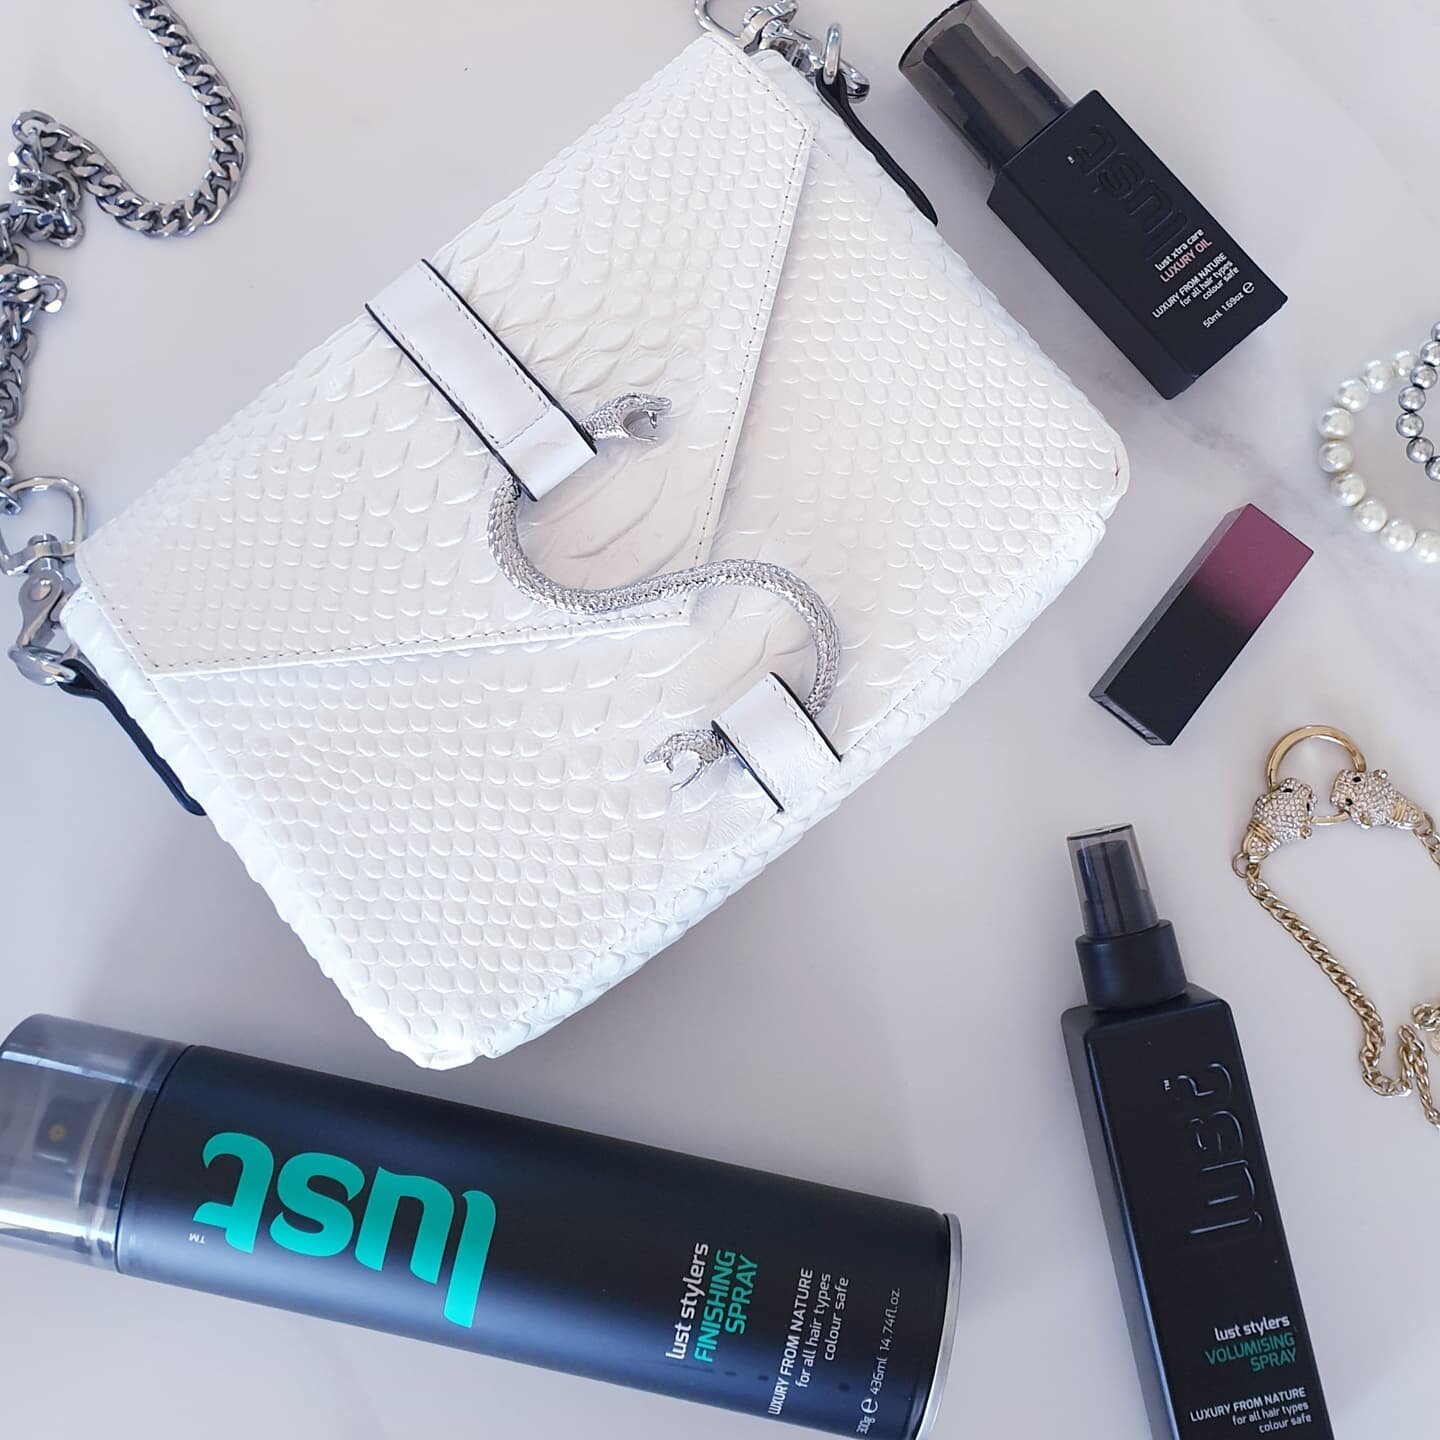 It's FriYAY!!! Who's got plans? Take your hair from day to night with our Lust Luxury Oil, Volumising Spay and Finishing Spray, apply a bright lippy, grab a cute purse from @stolengirlfriendsclub and your ready to go!